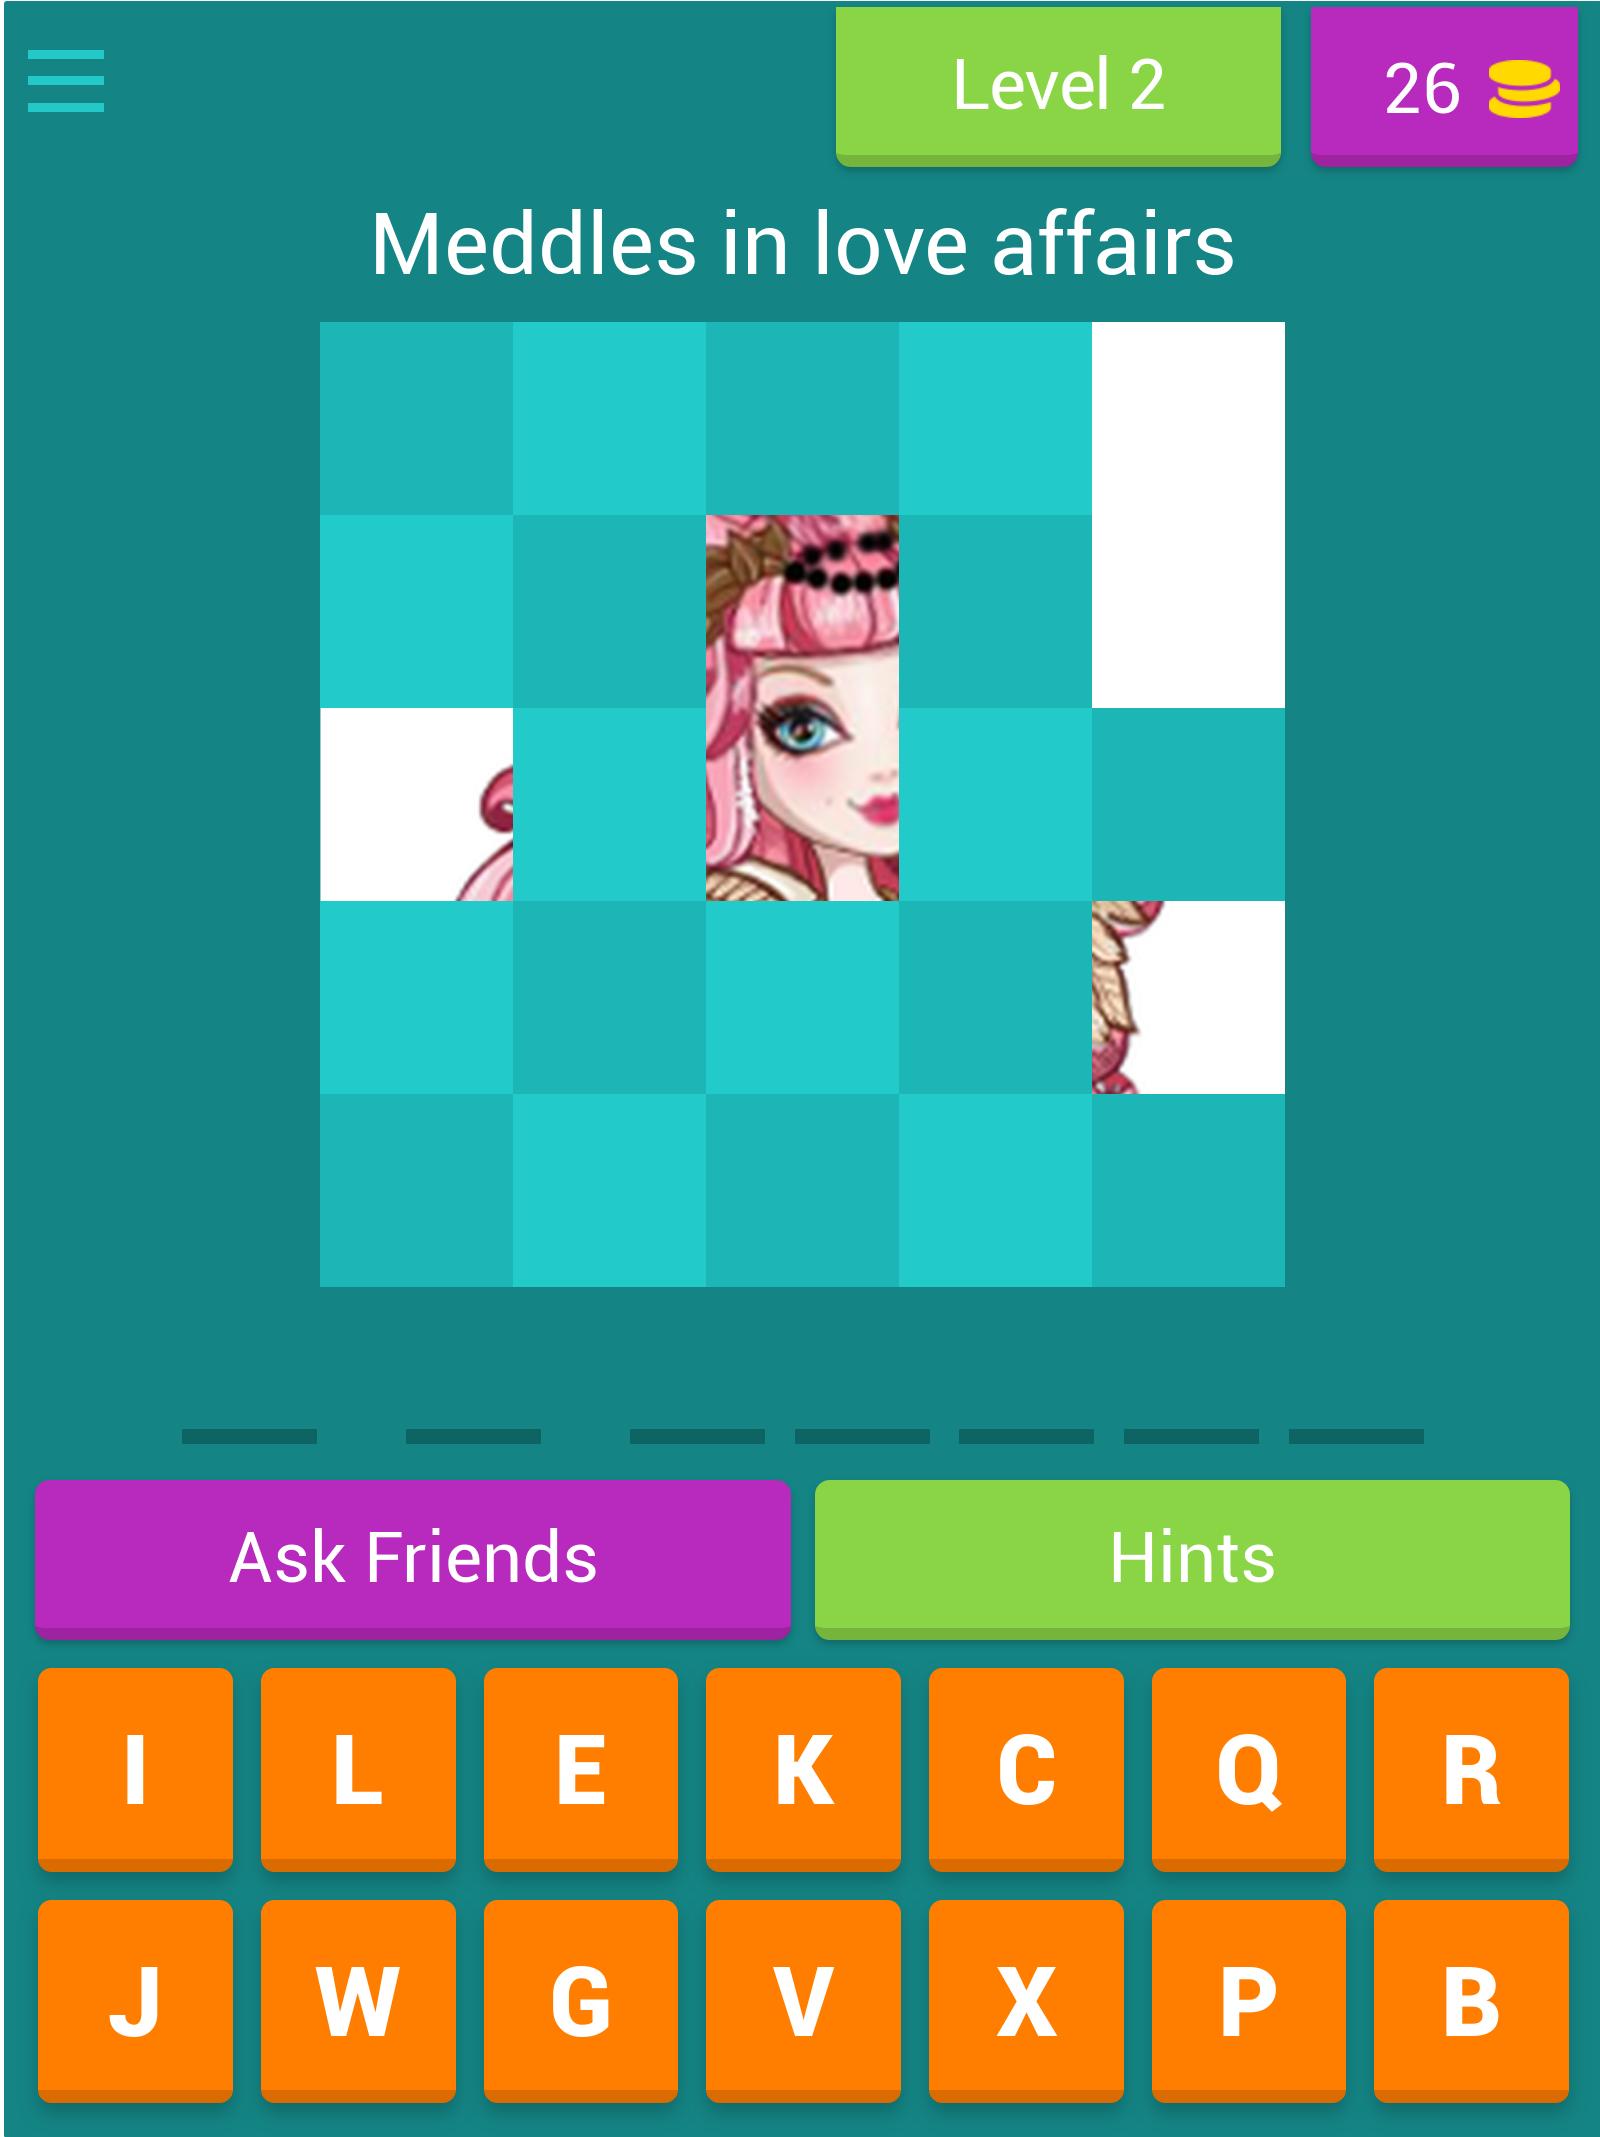 Guess The Ever After High Quiz for Android - APK Download